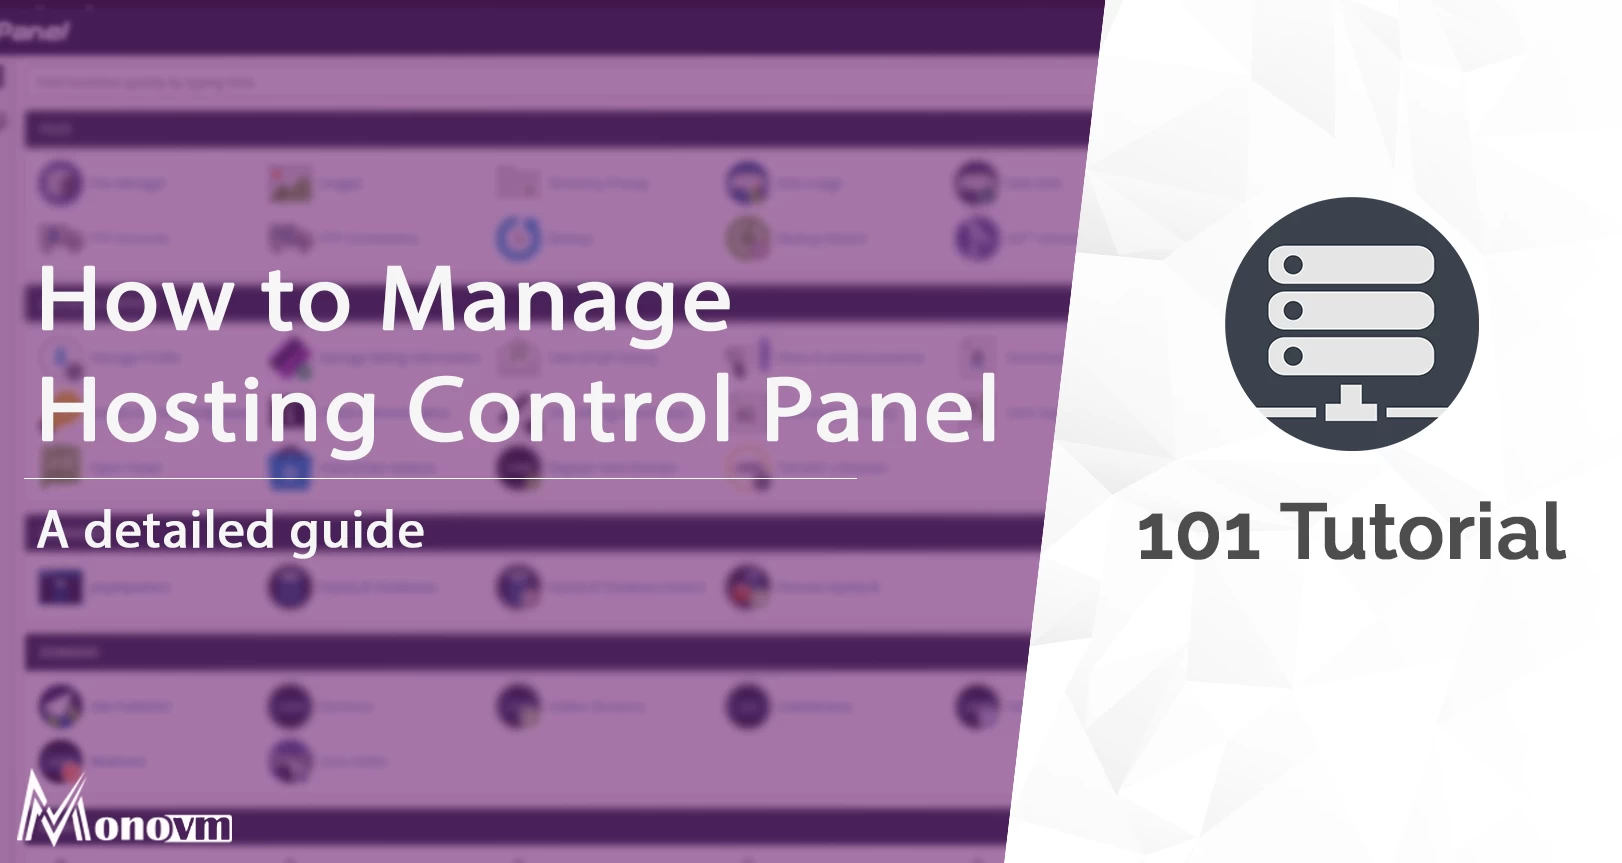 How to Use and Manage the cPanel Hosting Control Panel